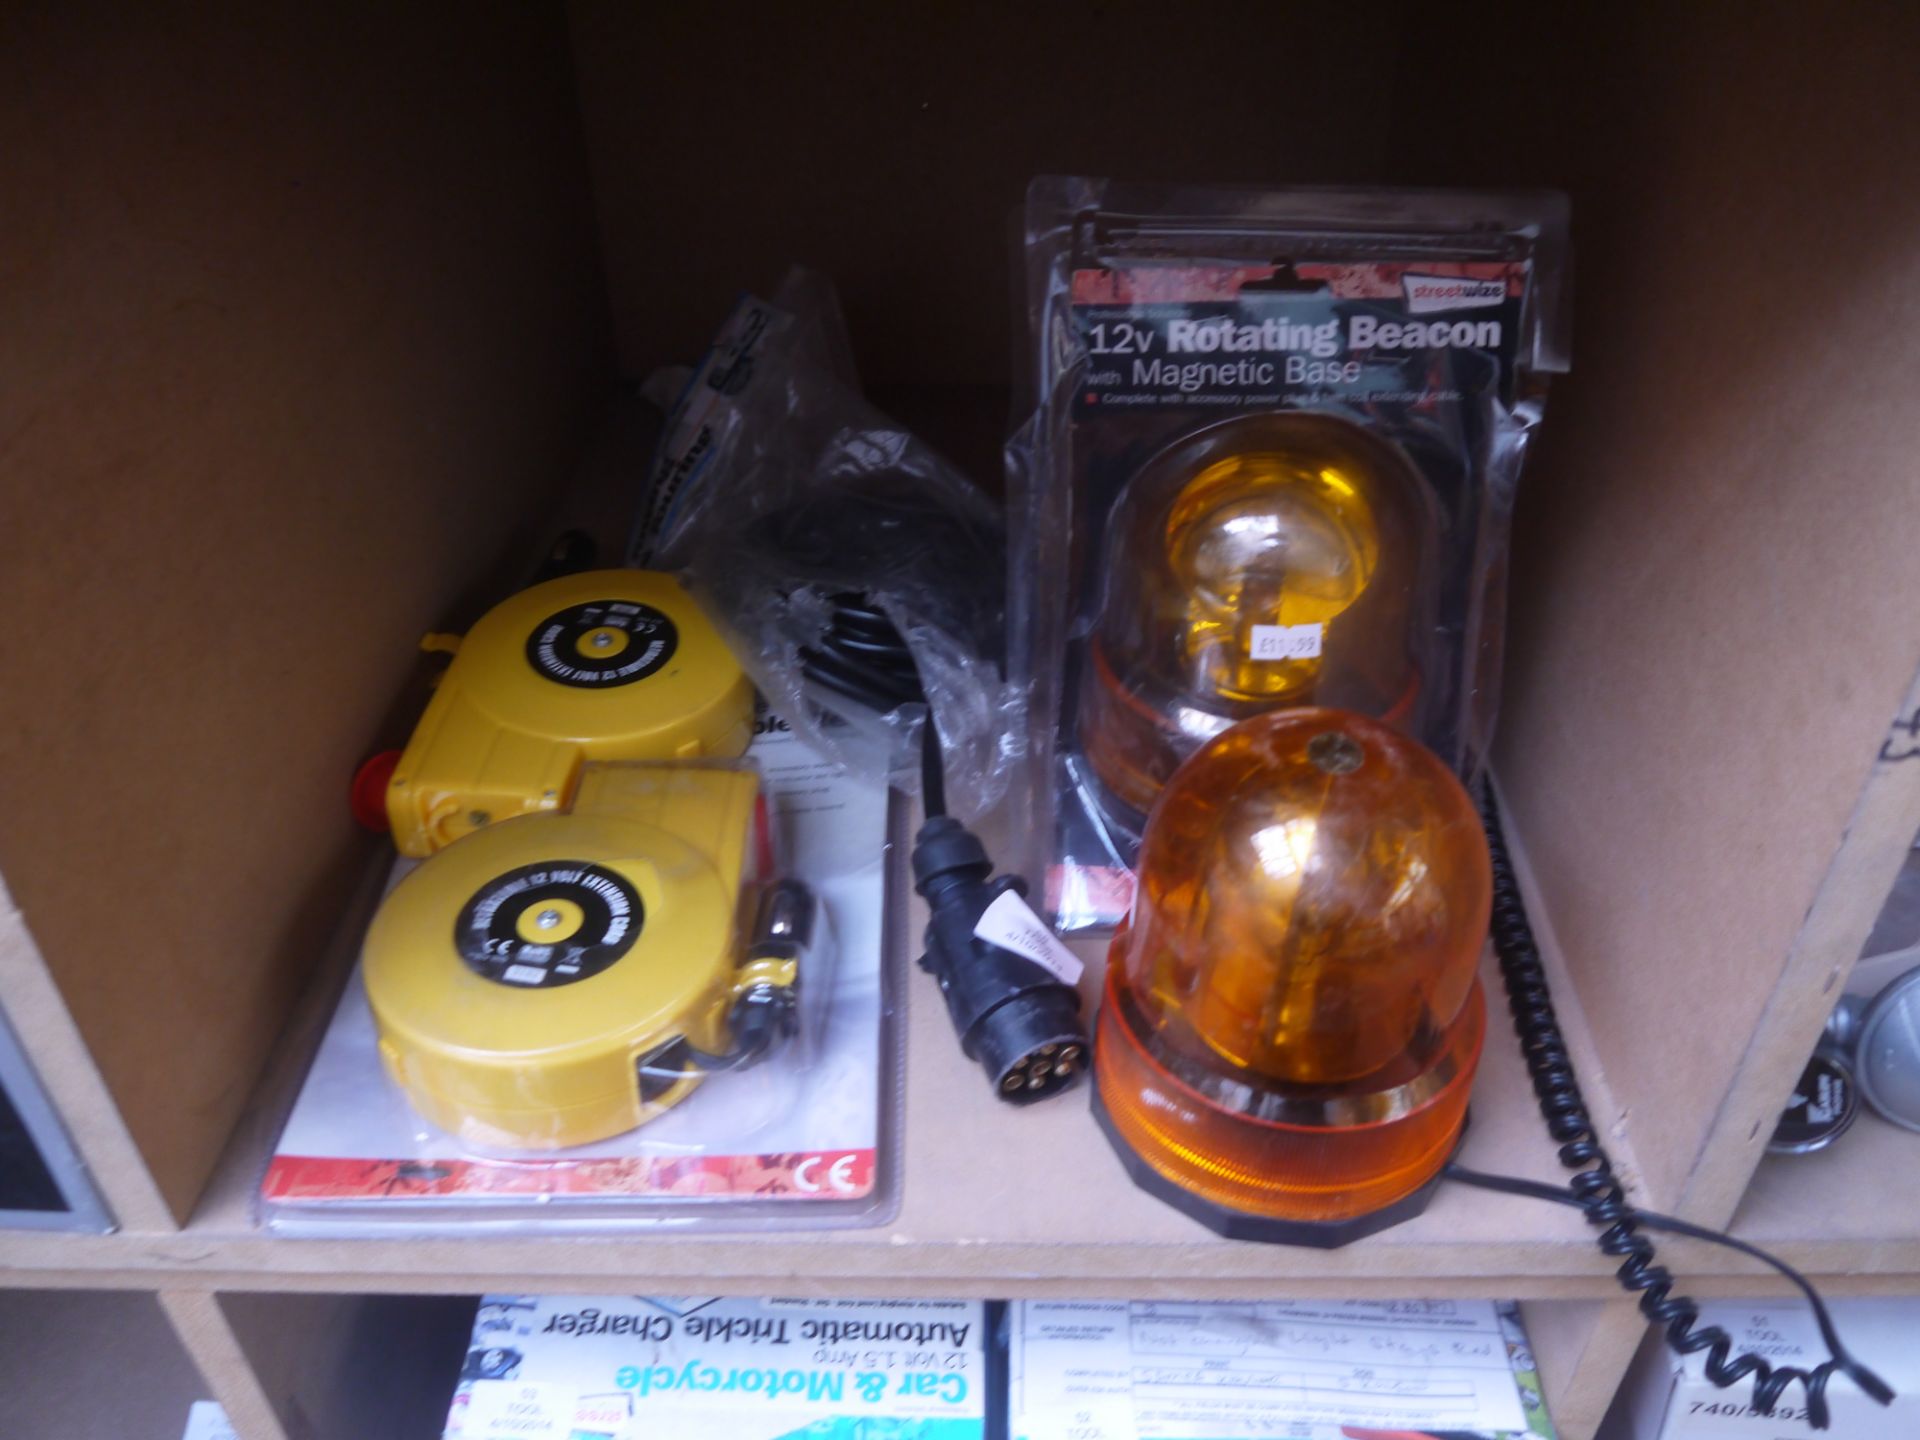 2x StreetWize Rotating Beacon. 2x StreetWize Retractable 12V Extension Cord. And 1x StreetWize 6m